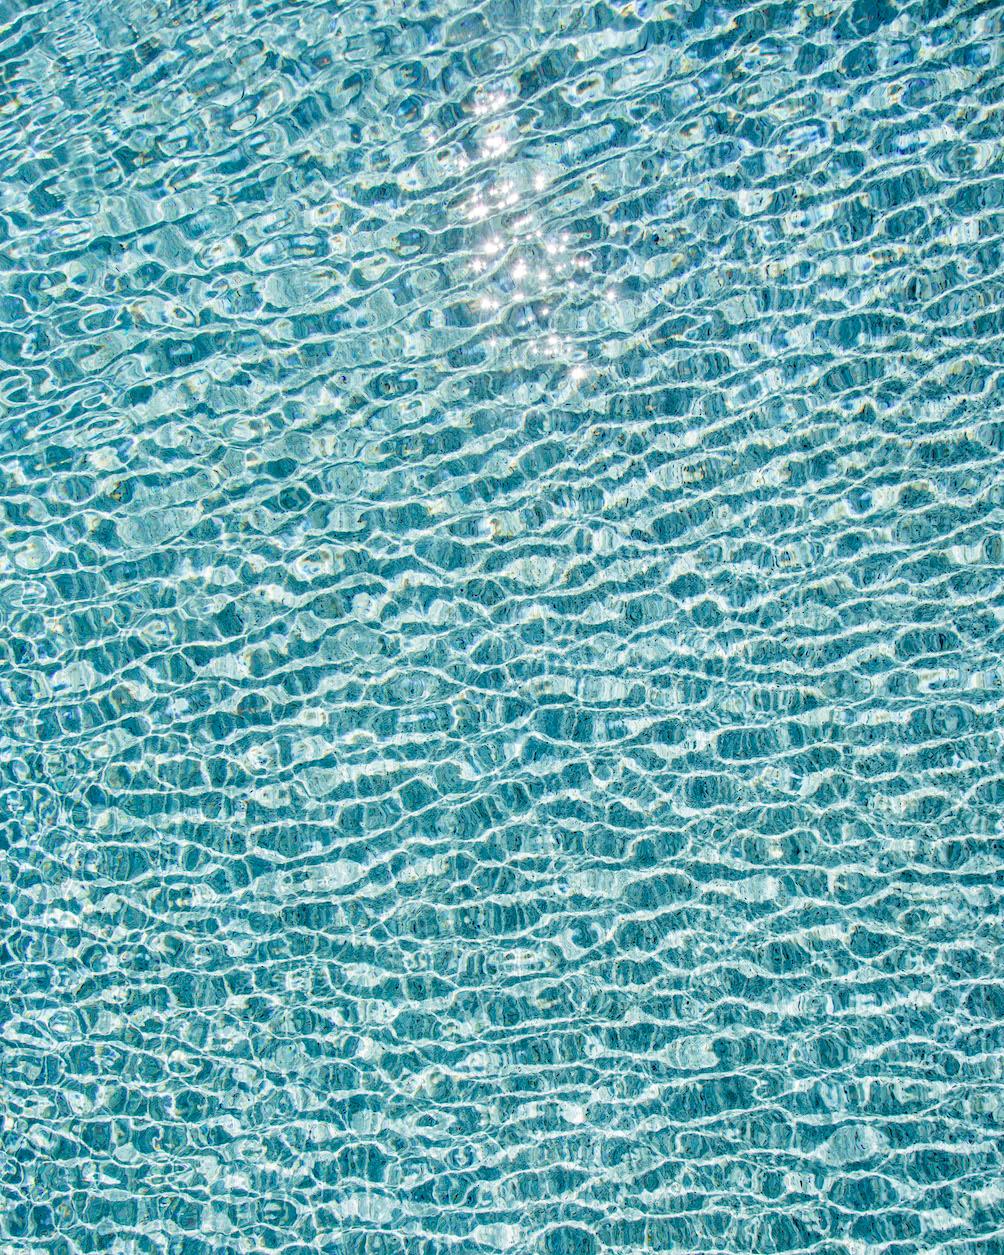 Erik Pawassar Abstract Photograph - H2O V - large format photograph of sun reflections on pool water surface